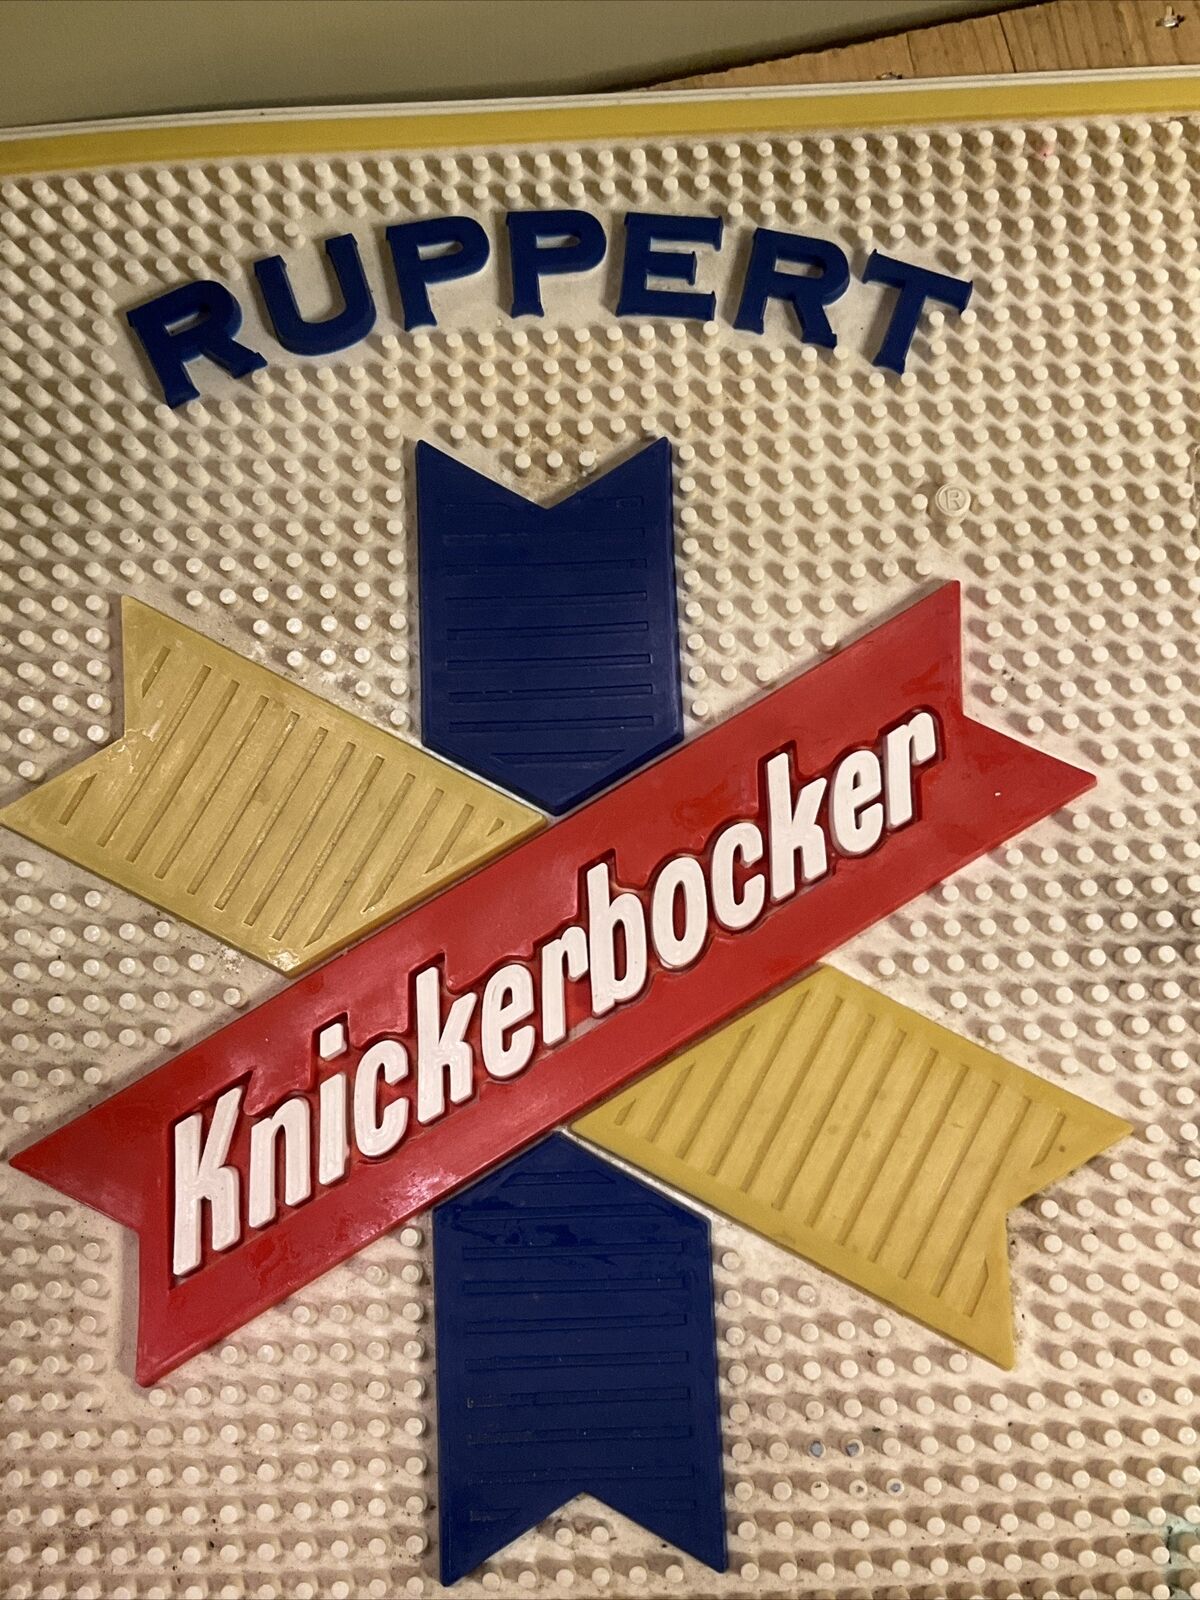 Vintage Knickerbocker NY Famous Beer Bar Mat, “one of the world”s great beers”